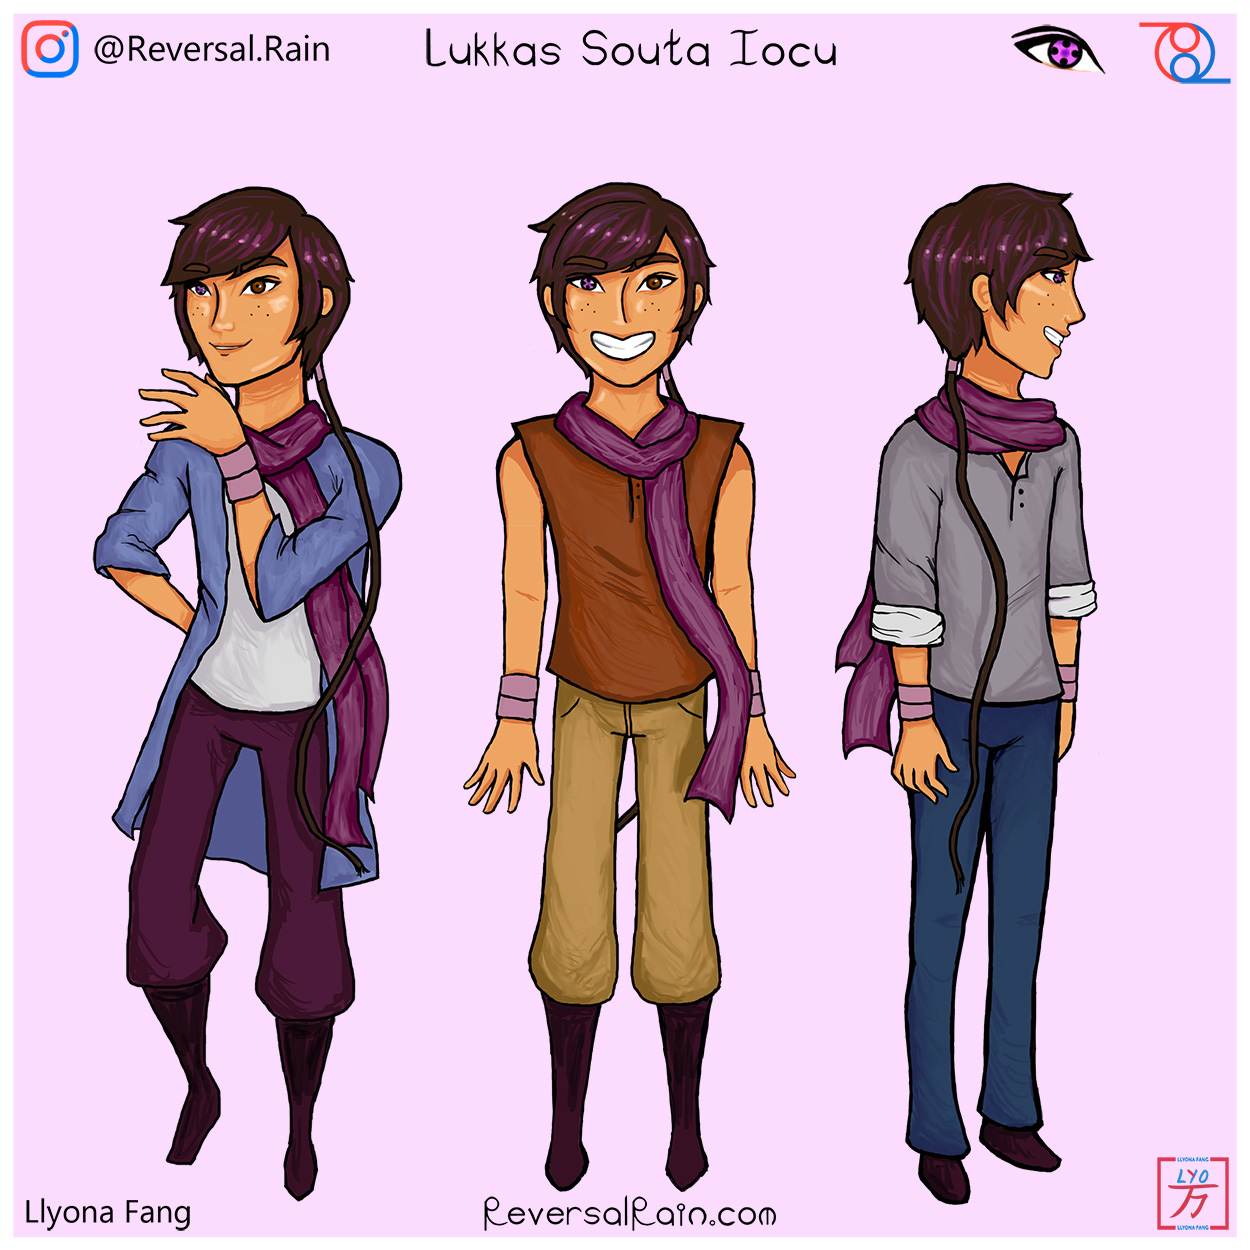 <p><h4>💜☁️ Lukkas Souta Iocu ☁️💜</h4></p>
            <p>A musician, archer, and wannabe entertainer!</p>
            <p>🎶 Instrument: Flute</p>
              <p>The son of the village doctor isn't interested in following his father's steps, but loves to make the world a happier place with his
                frivolous entertainment! You might find him acting out a funny story while he grabs a drink at The Queen Been, or singing along to
                the faded tunes of some old record player. The call of his flute seems to speak to the birds in the sky, seemingly calming the wind
                for just a moment. While he may be an adventurous hunter when he climbs atop a lofty branch and patiently aims his arrow at quarry,
                he dares not to venture below the understory. In fact, he hates the thought of getting caught for breaking a rule. You could say he
                might just get a little ticked when peer pressure breaks his goody-two-shoes aura.<p><p>
                <p>» <i>Click to exit description!</i> «</p>
              </p>
              